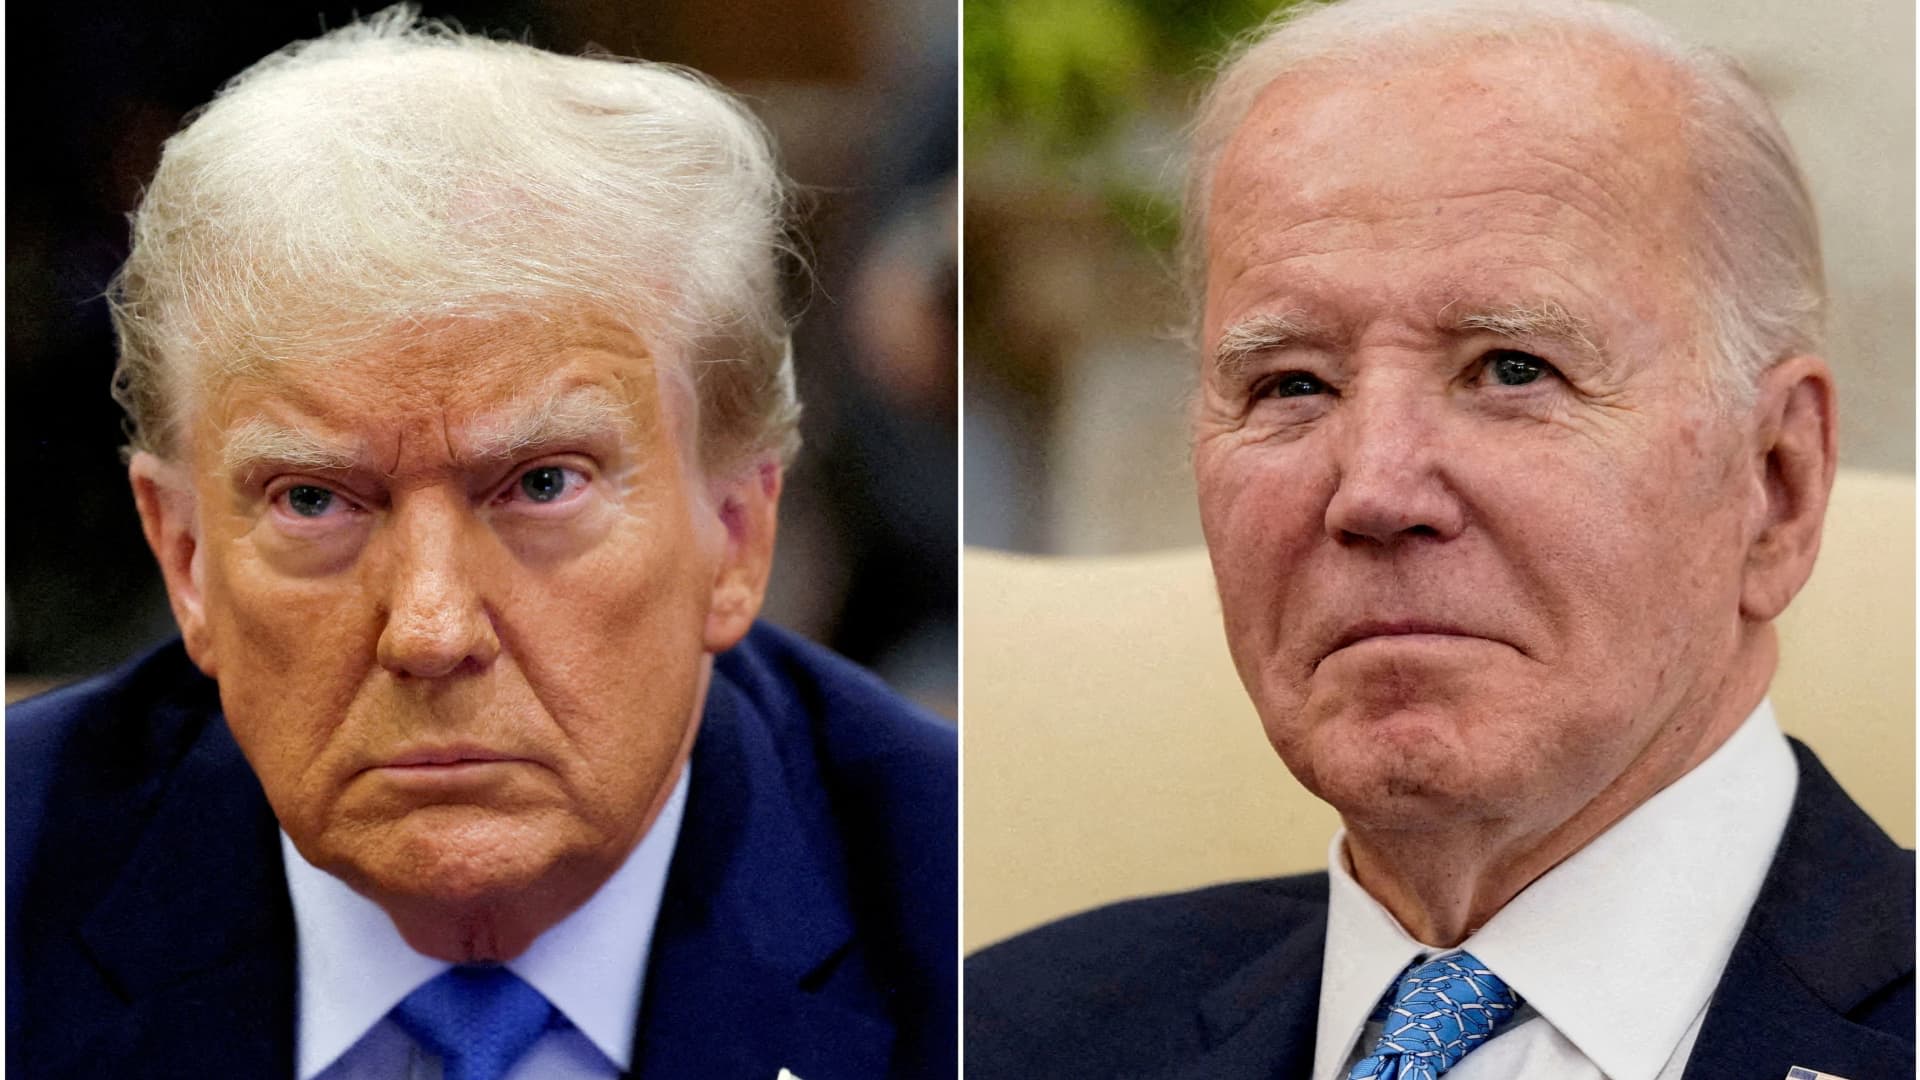 Majority of economists say inflation would be higher under Trump than Biden: WSJ survey